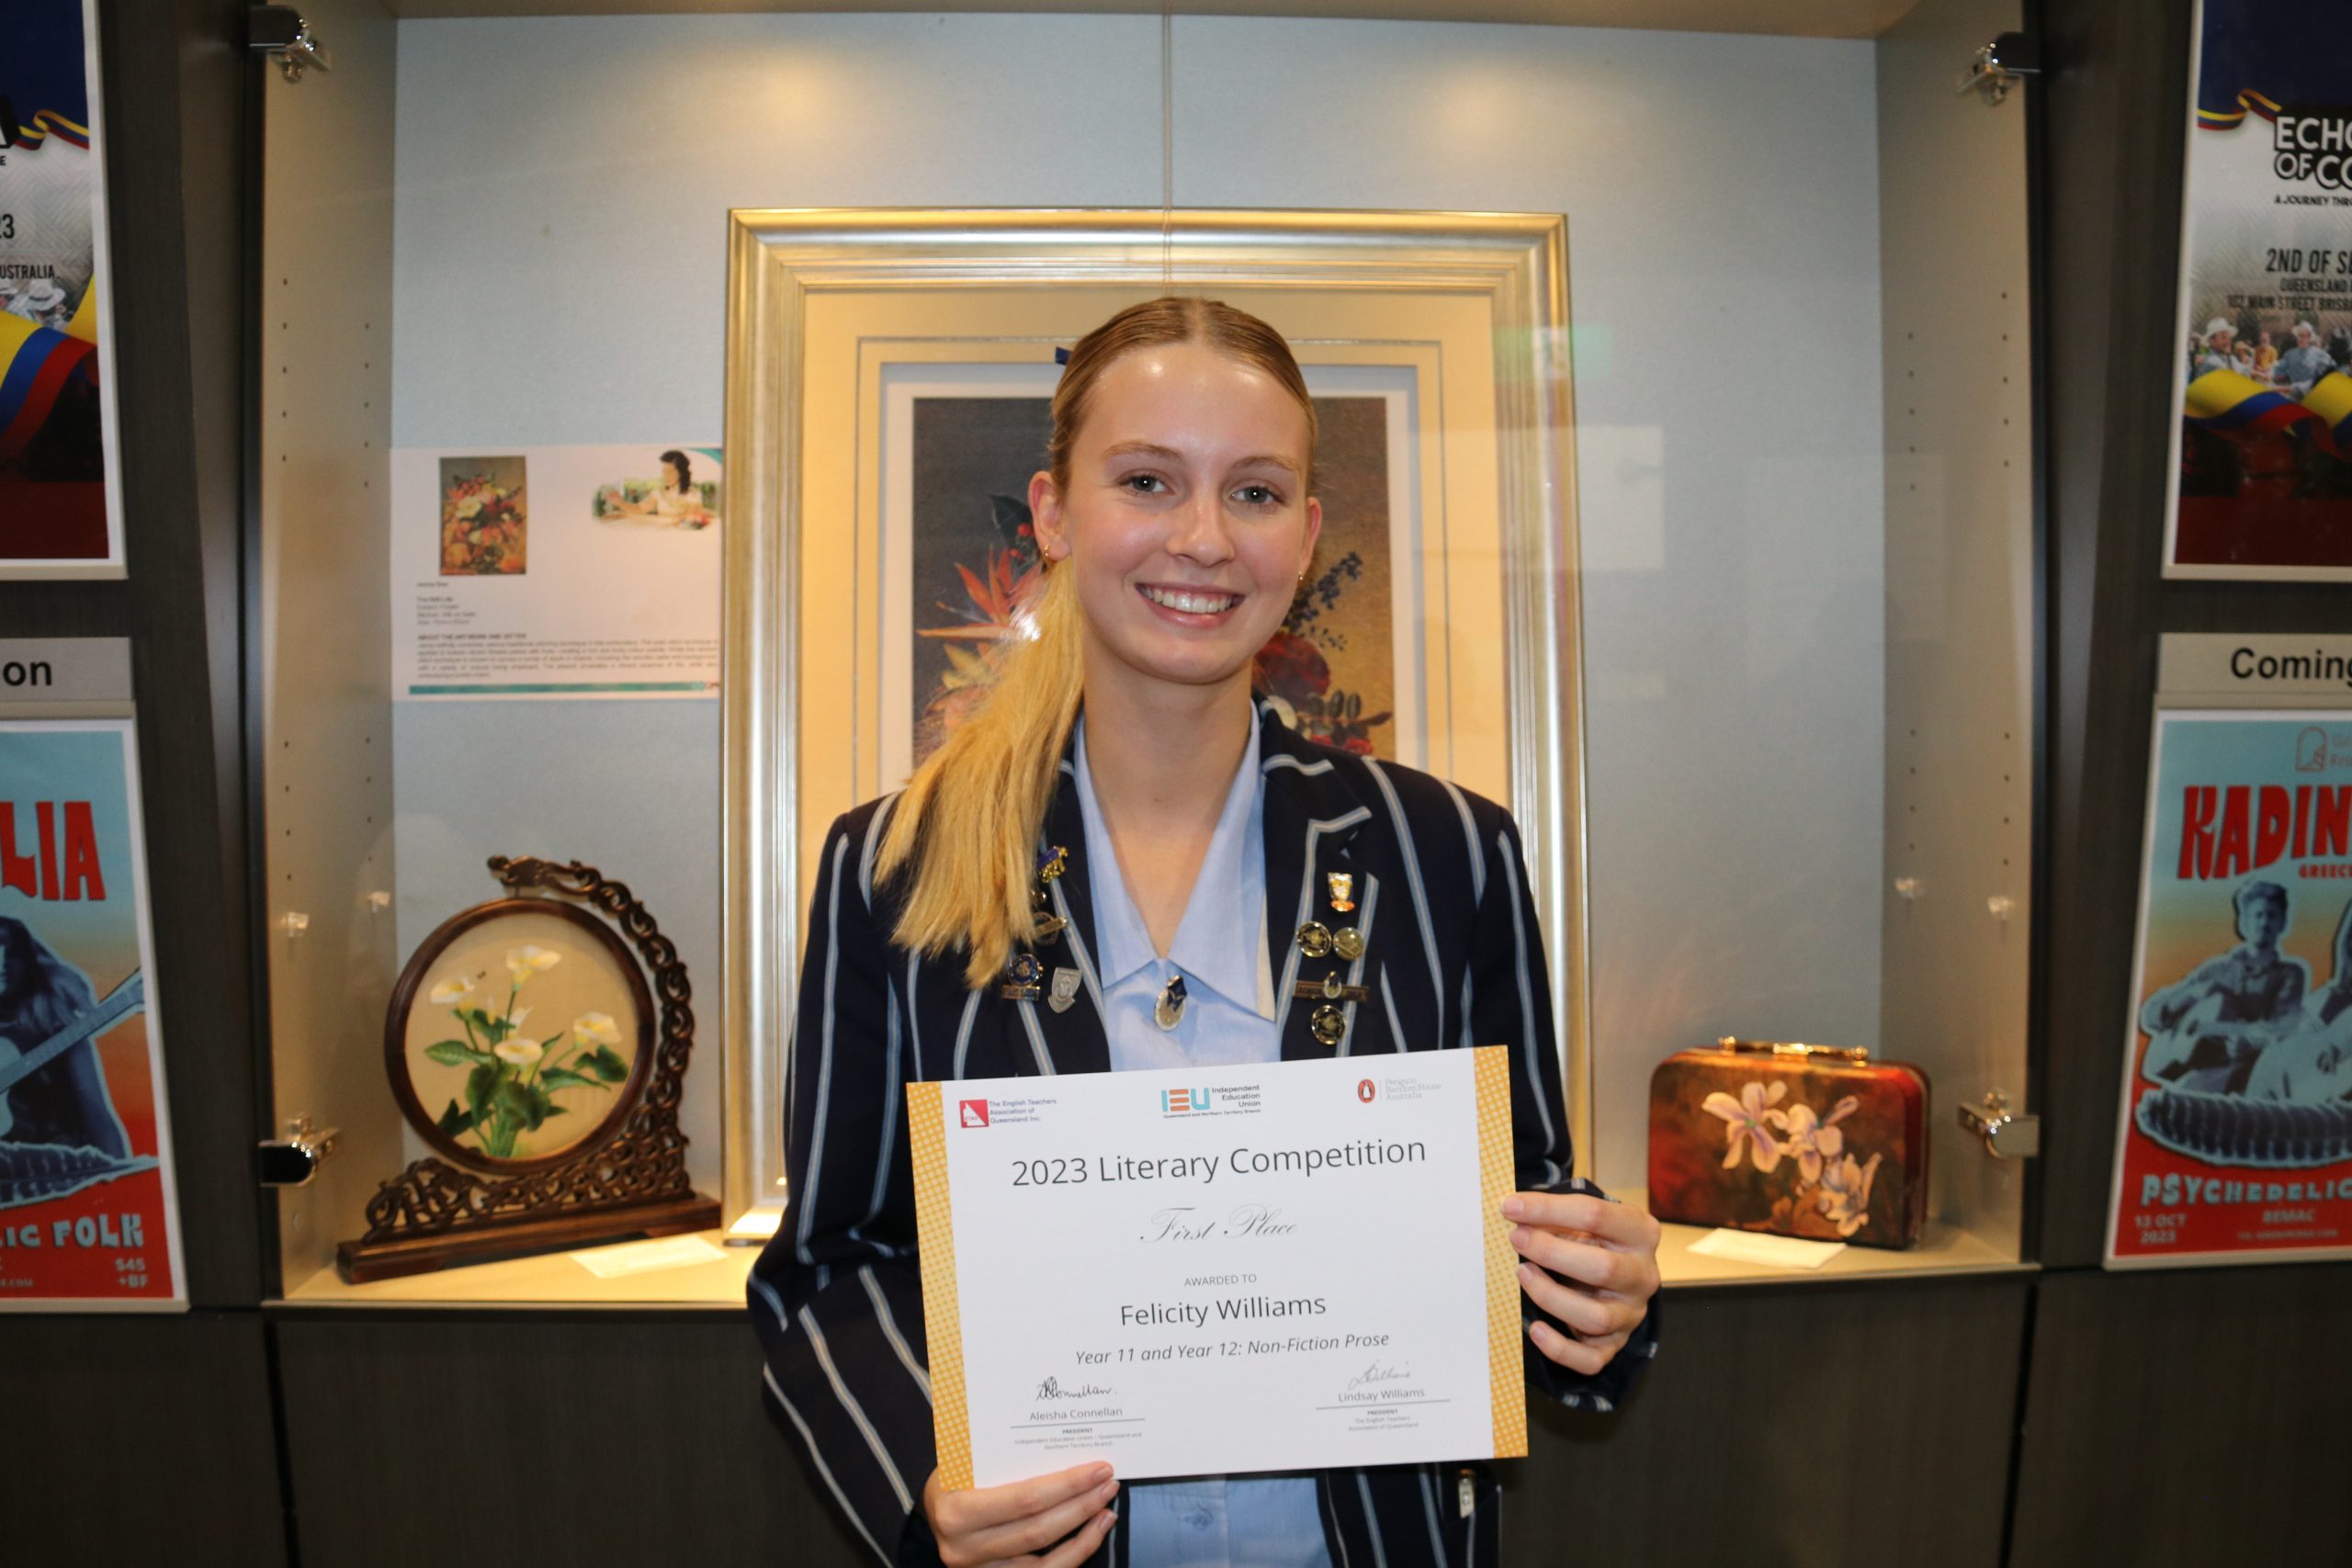 Felicity Williams, Year 11 and 12 non-fiction prose winner